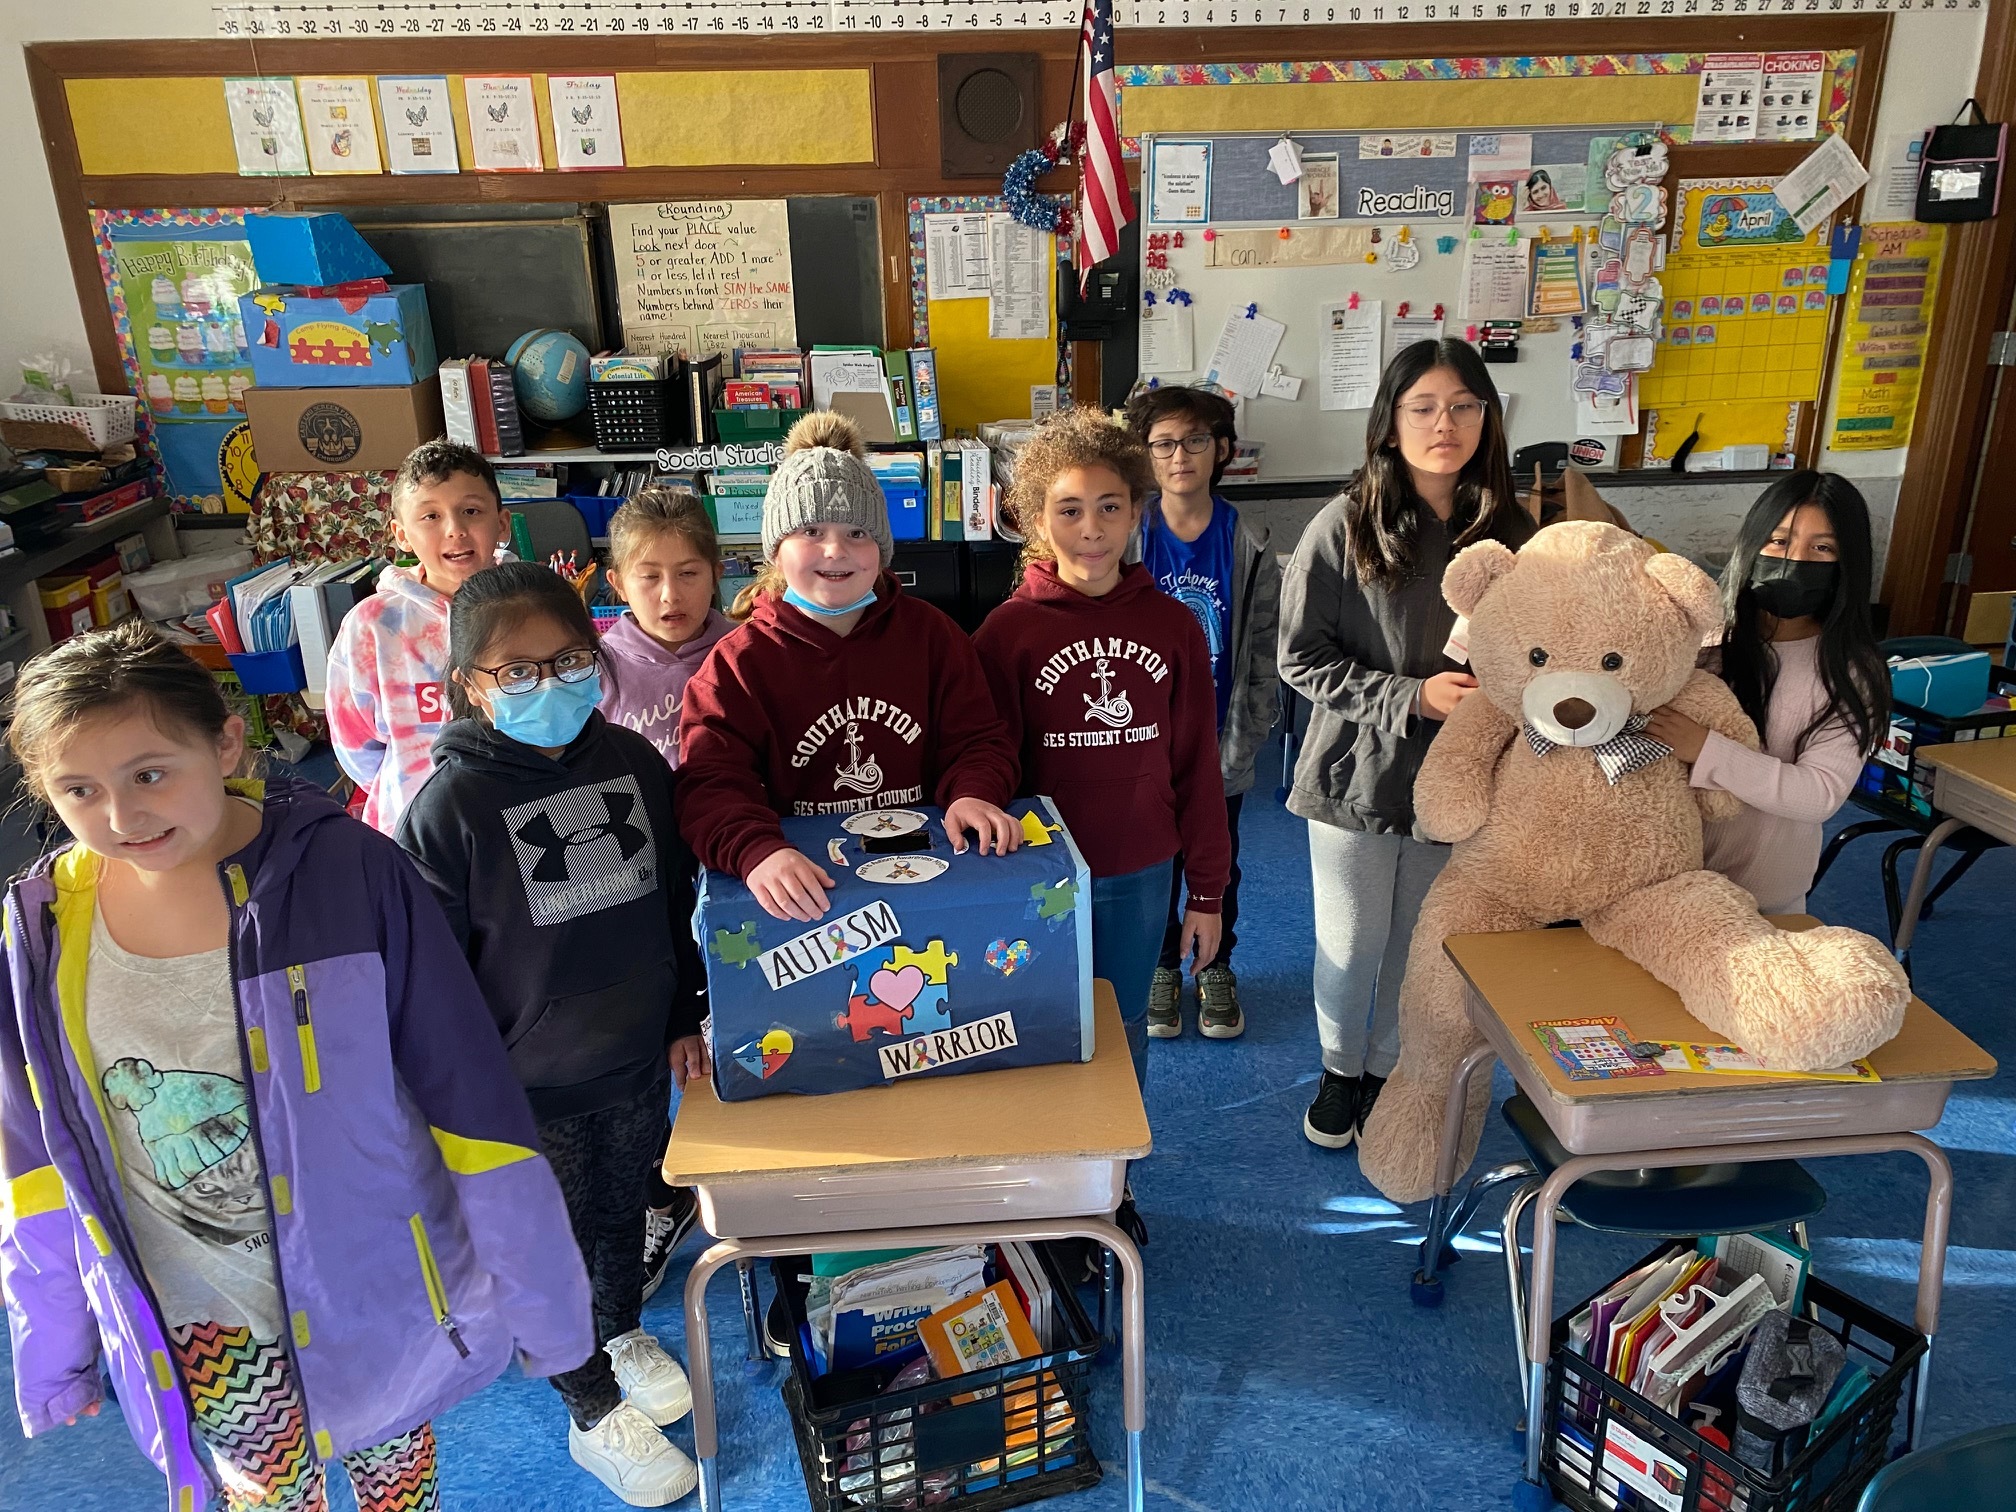 Student council members at Southampton Elementary School recently held an autism awareness fundraiser, raffling off a teddy bear. Proceeds will go to the Flying Point Foundation for Autism.  COURTESY SOUTHAMPTON ELEMENTARY SCHOOL